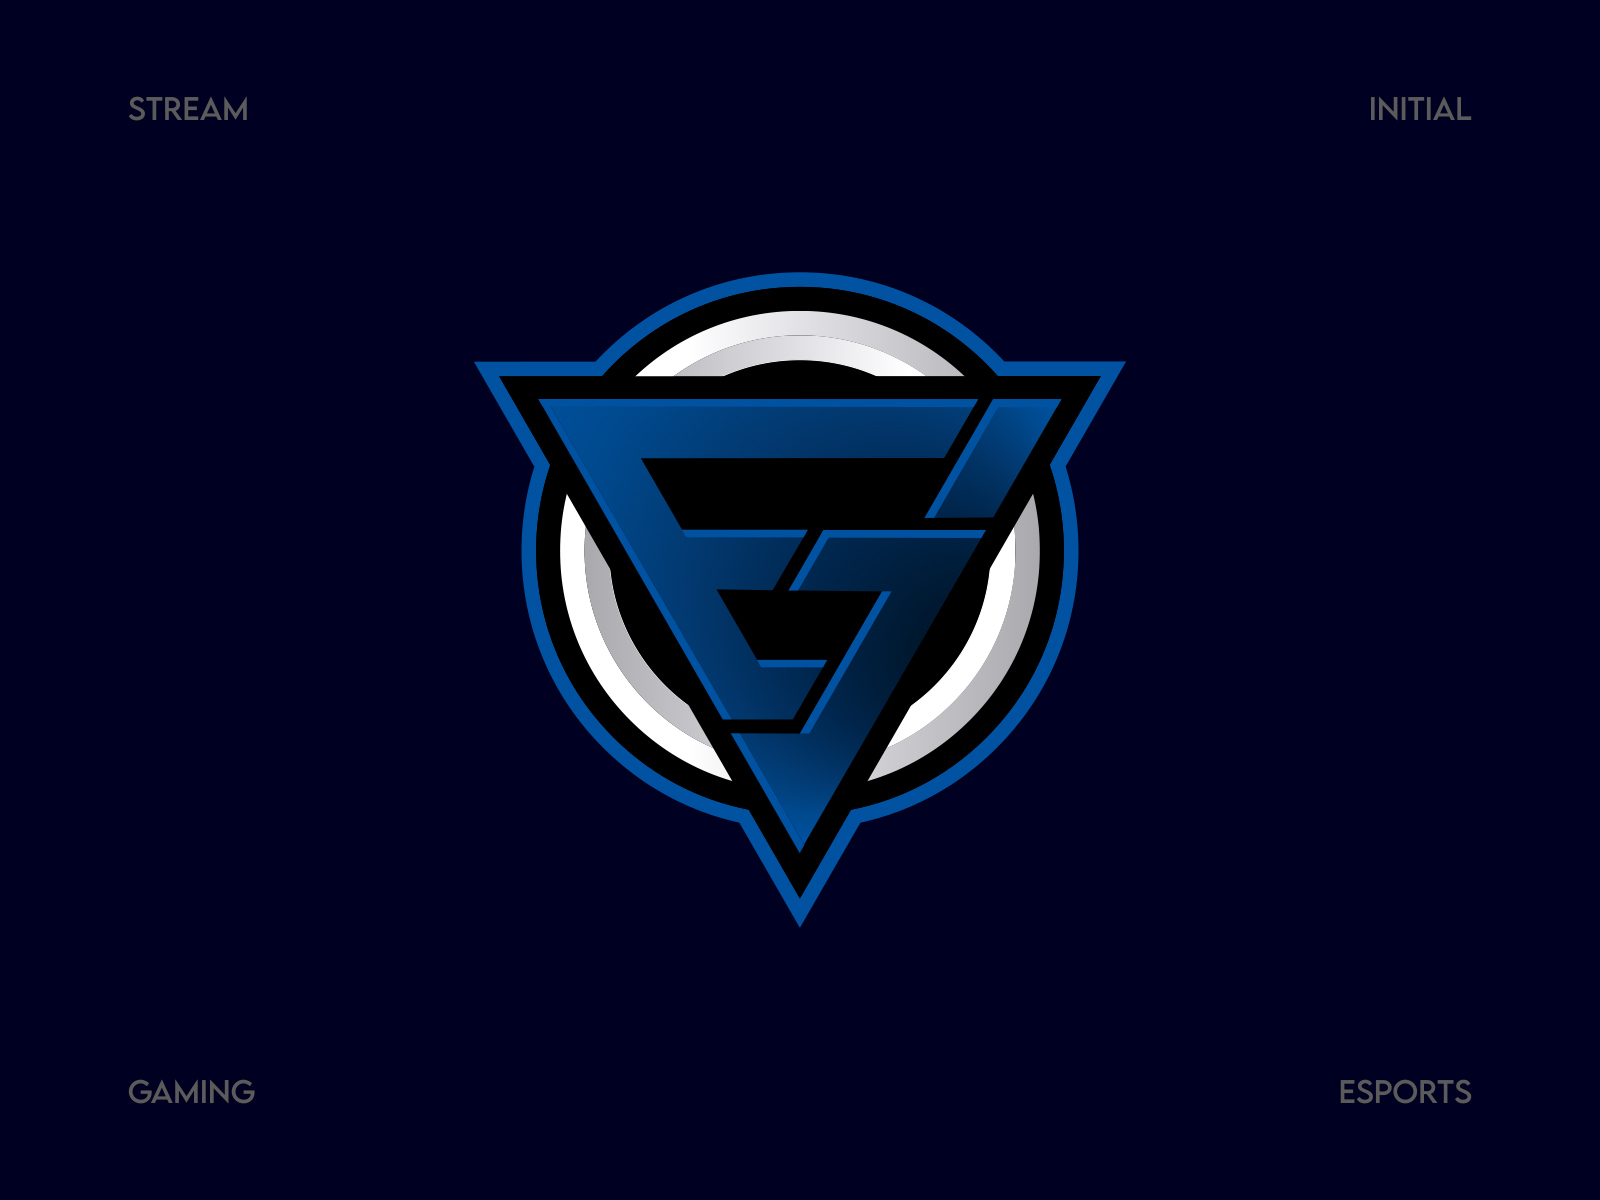 INITIAL LETTER GAMING LOGO DESIGN by Roshme Akther on Dribbble